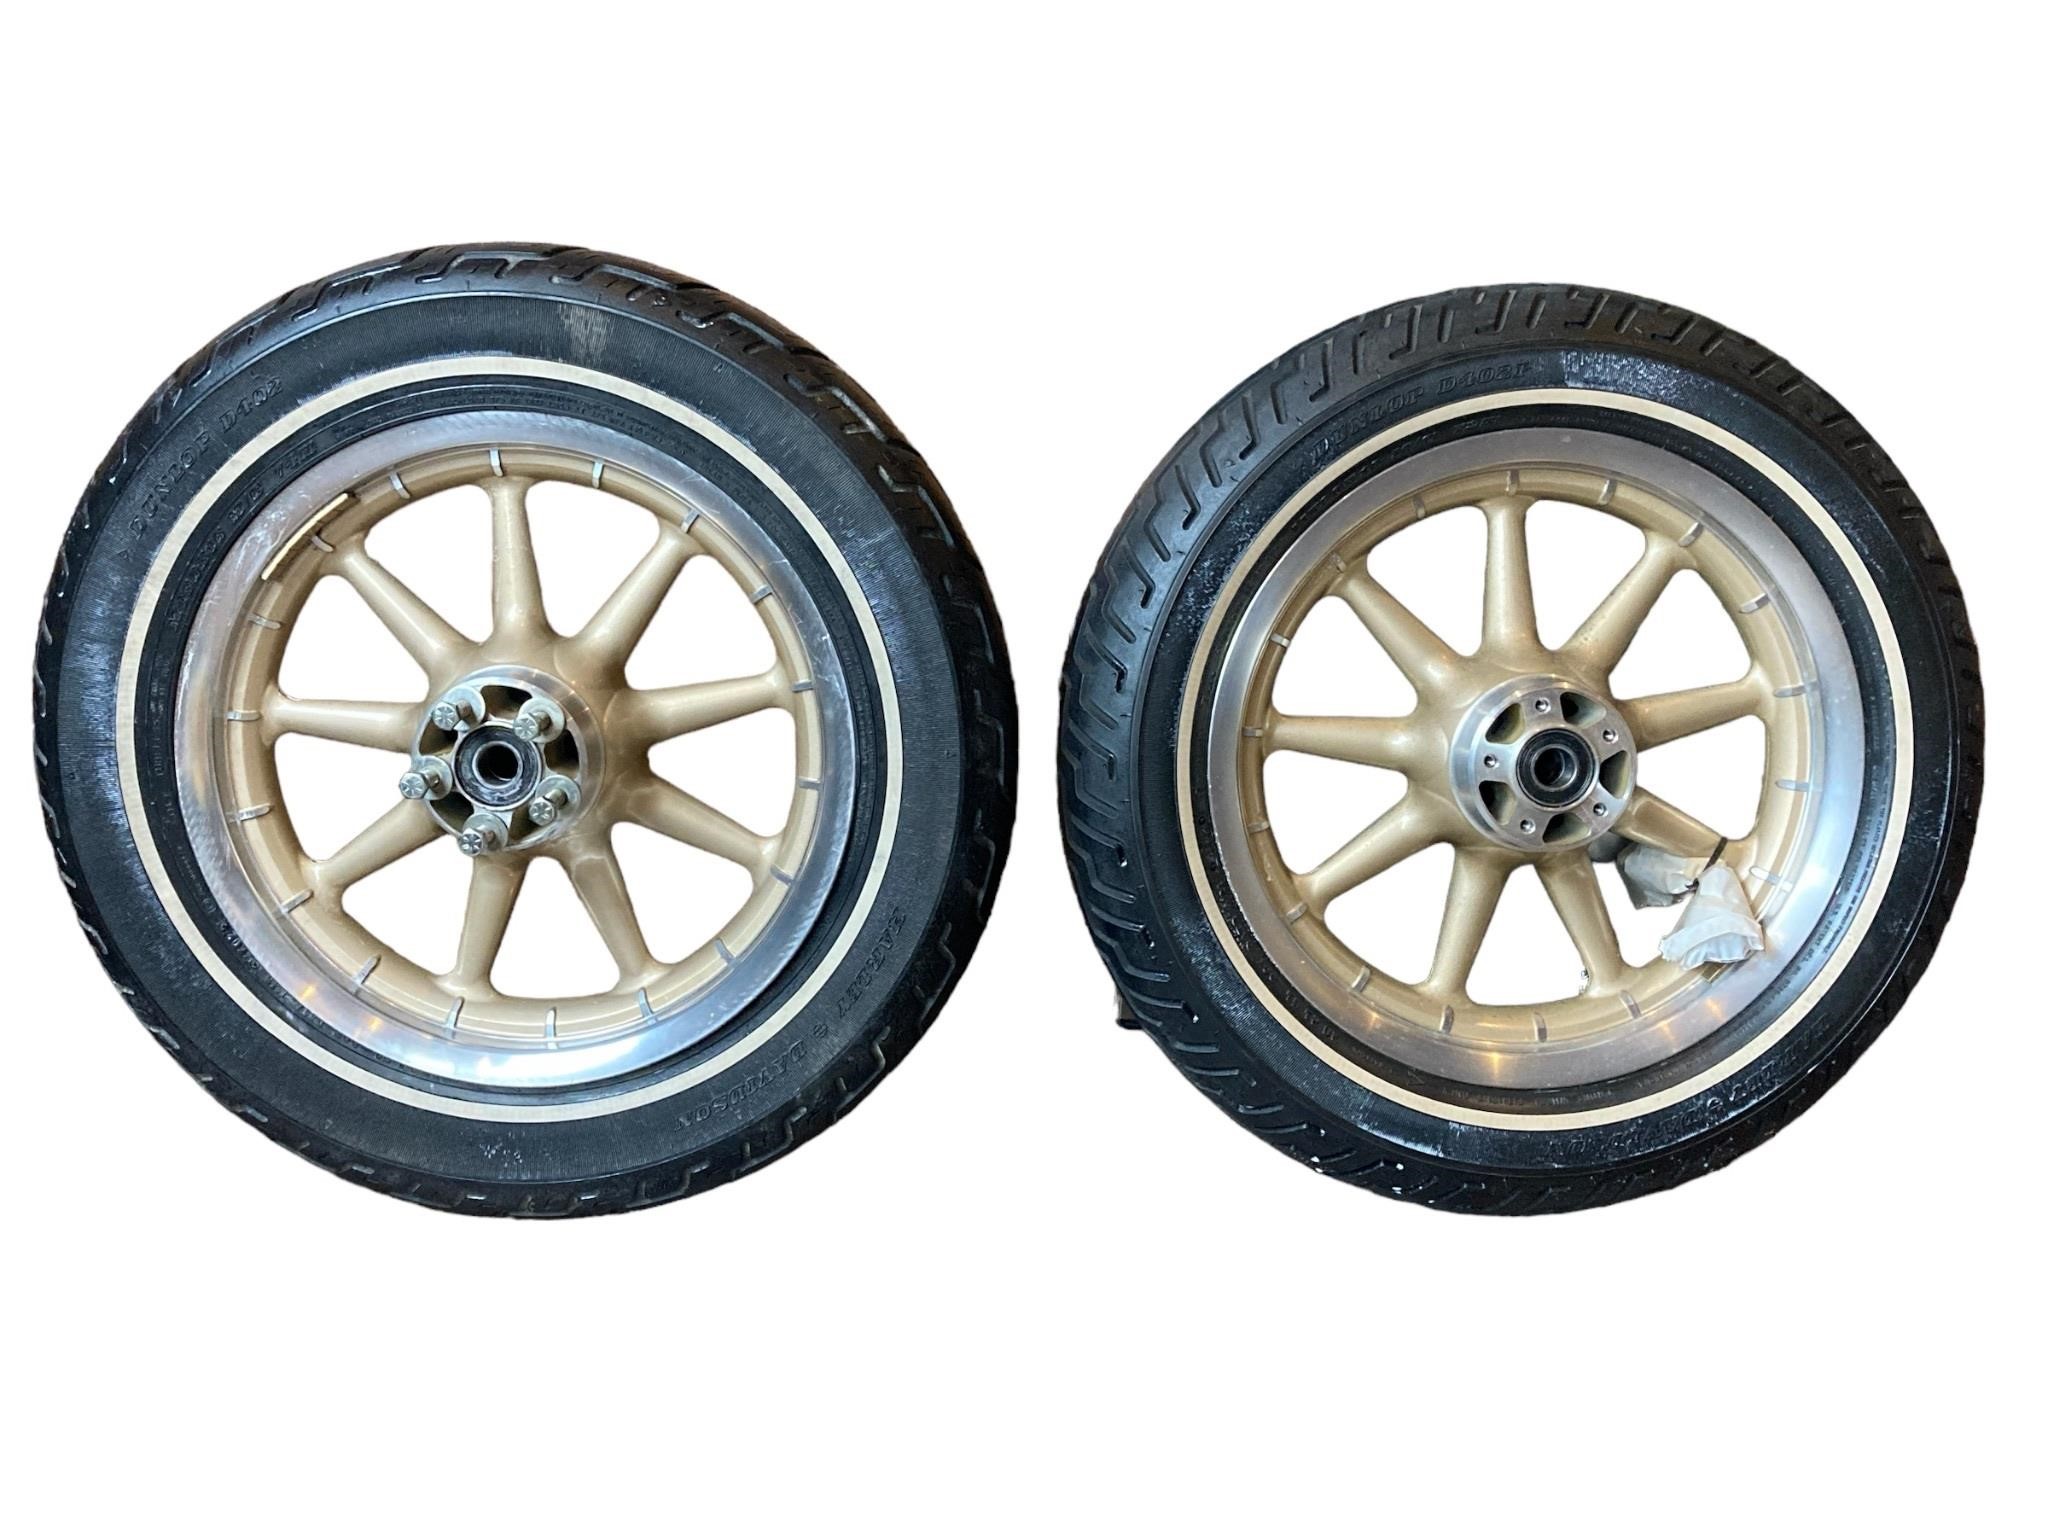 Pair Of Dunlop D402 Tires For Sportsters